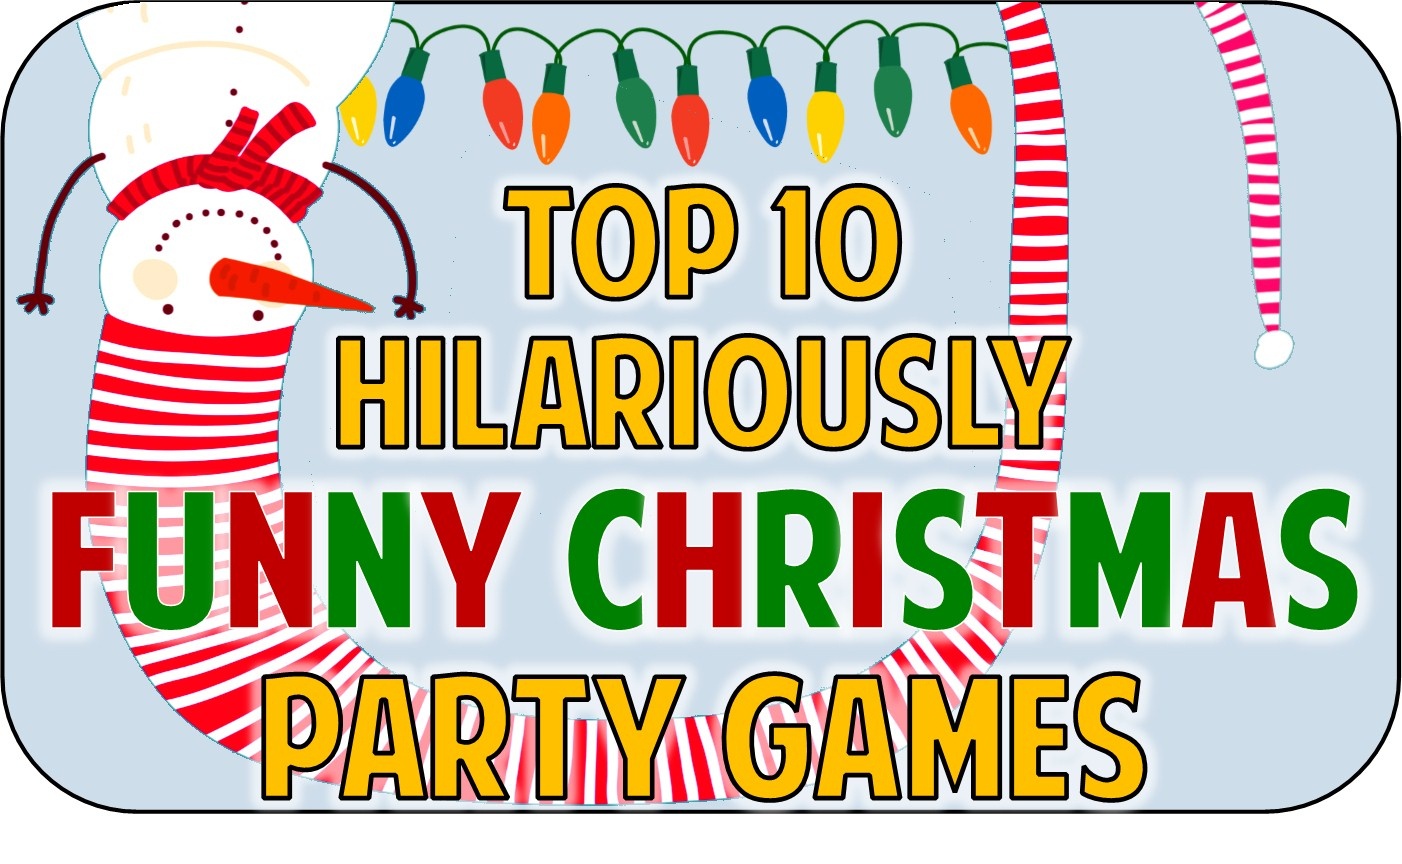 Christmas Party Office Games - Holiday Office Party Games Free Printable